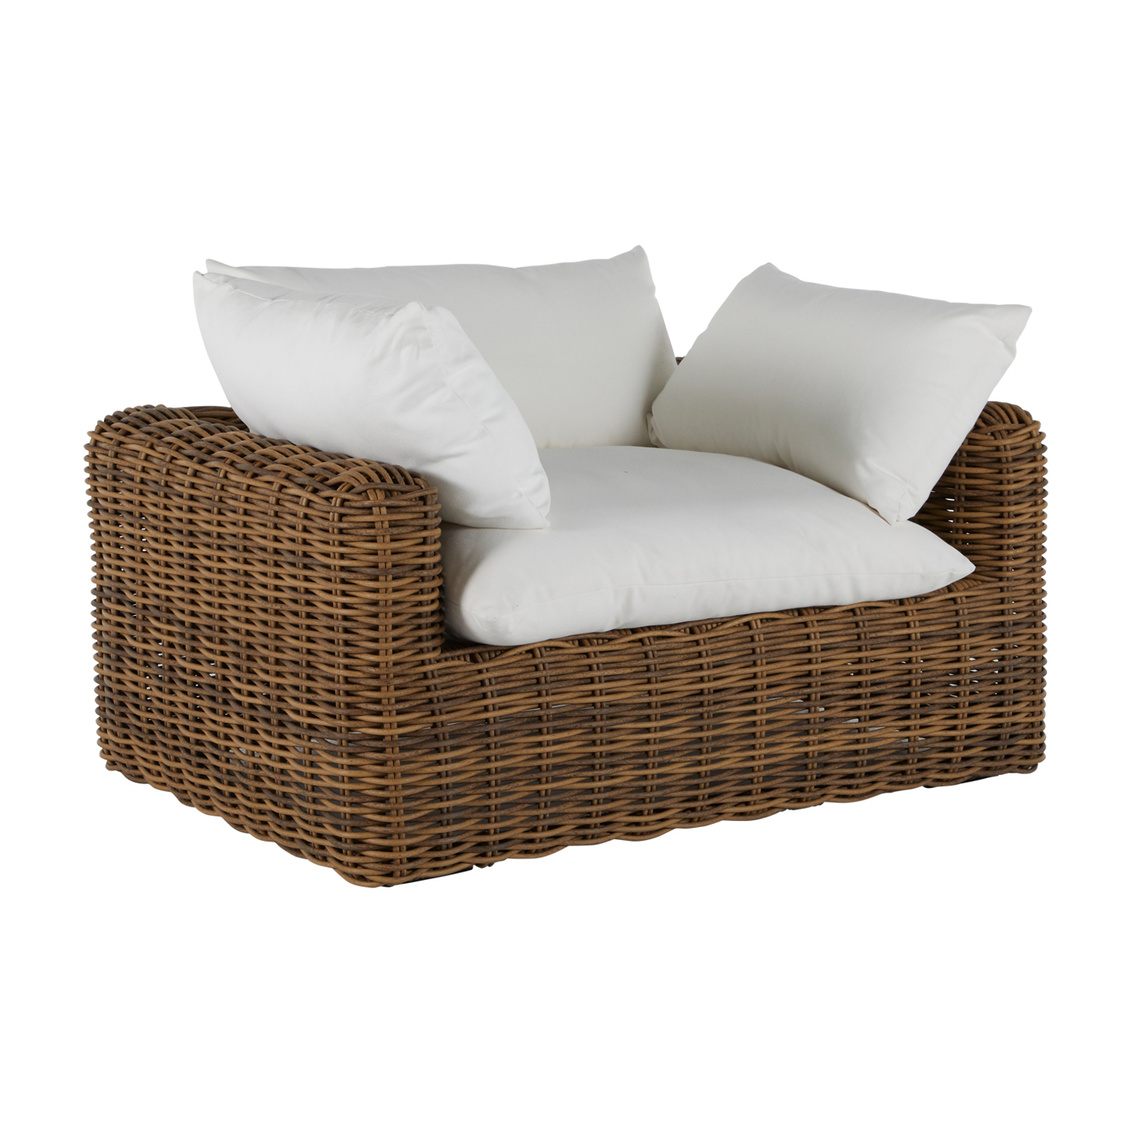 montecito lounge in raffia – frame only product image